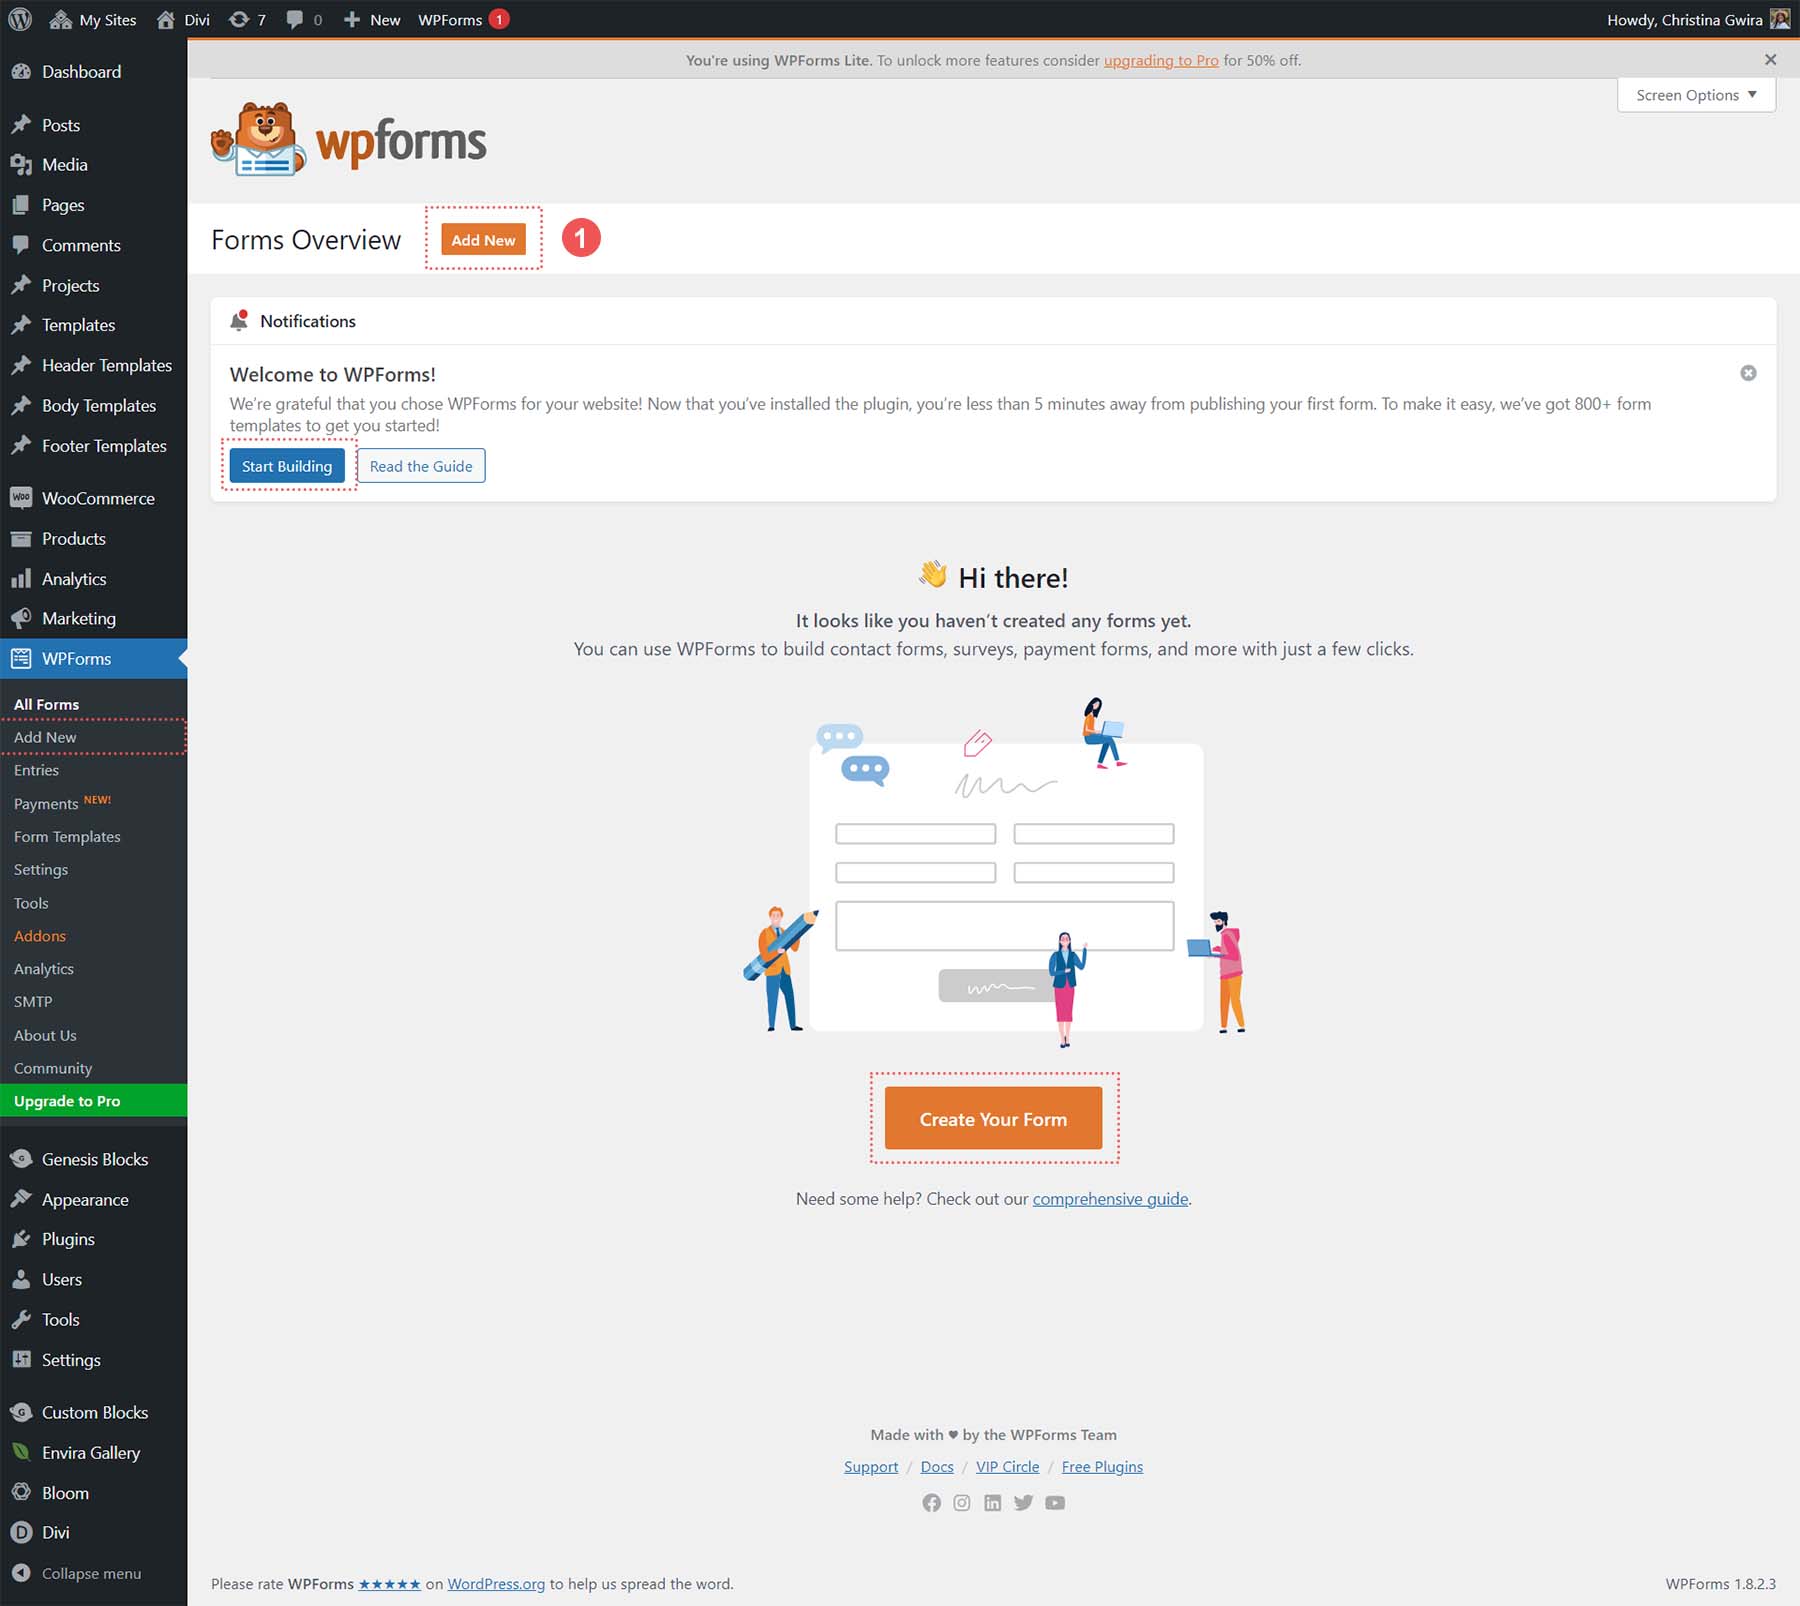 Creatings a new form from the WPForms Dashboard